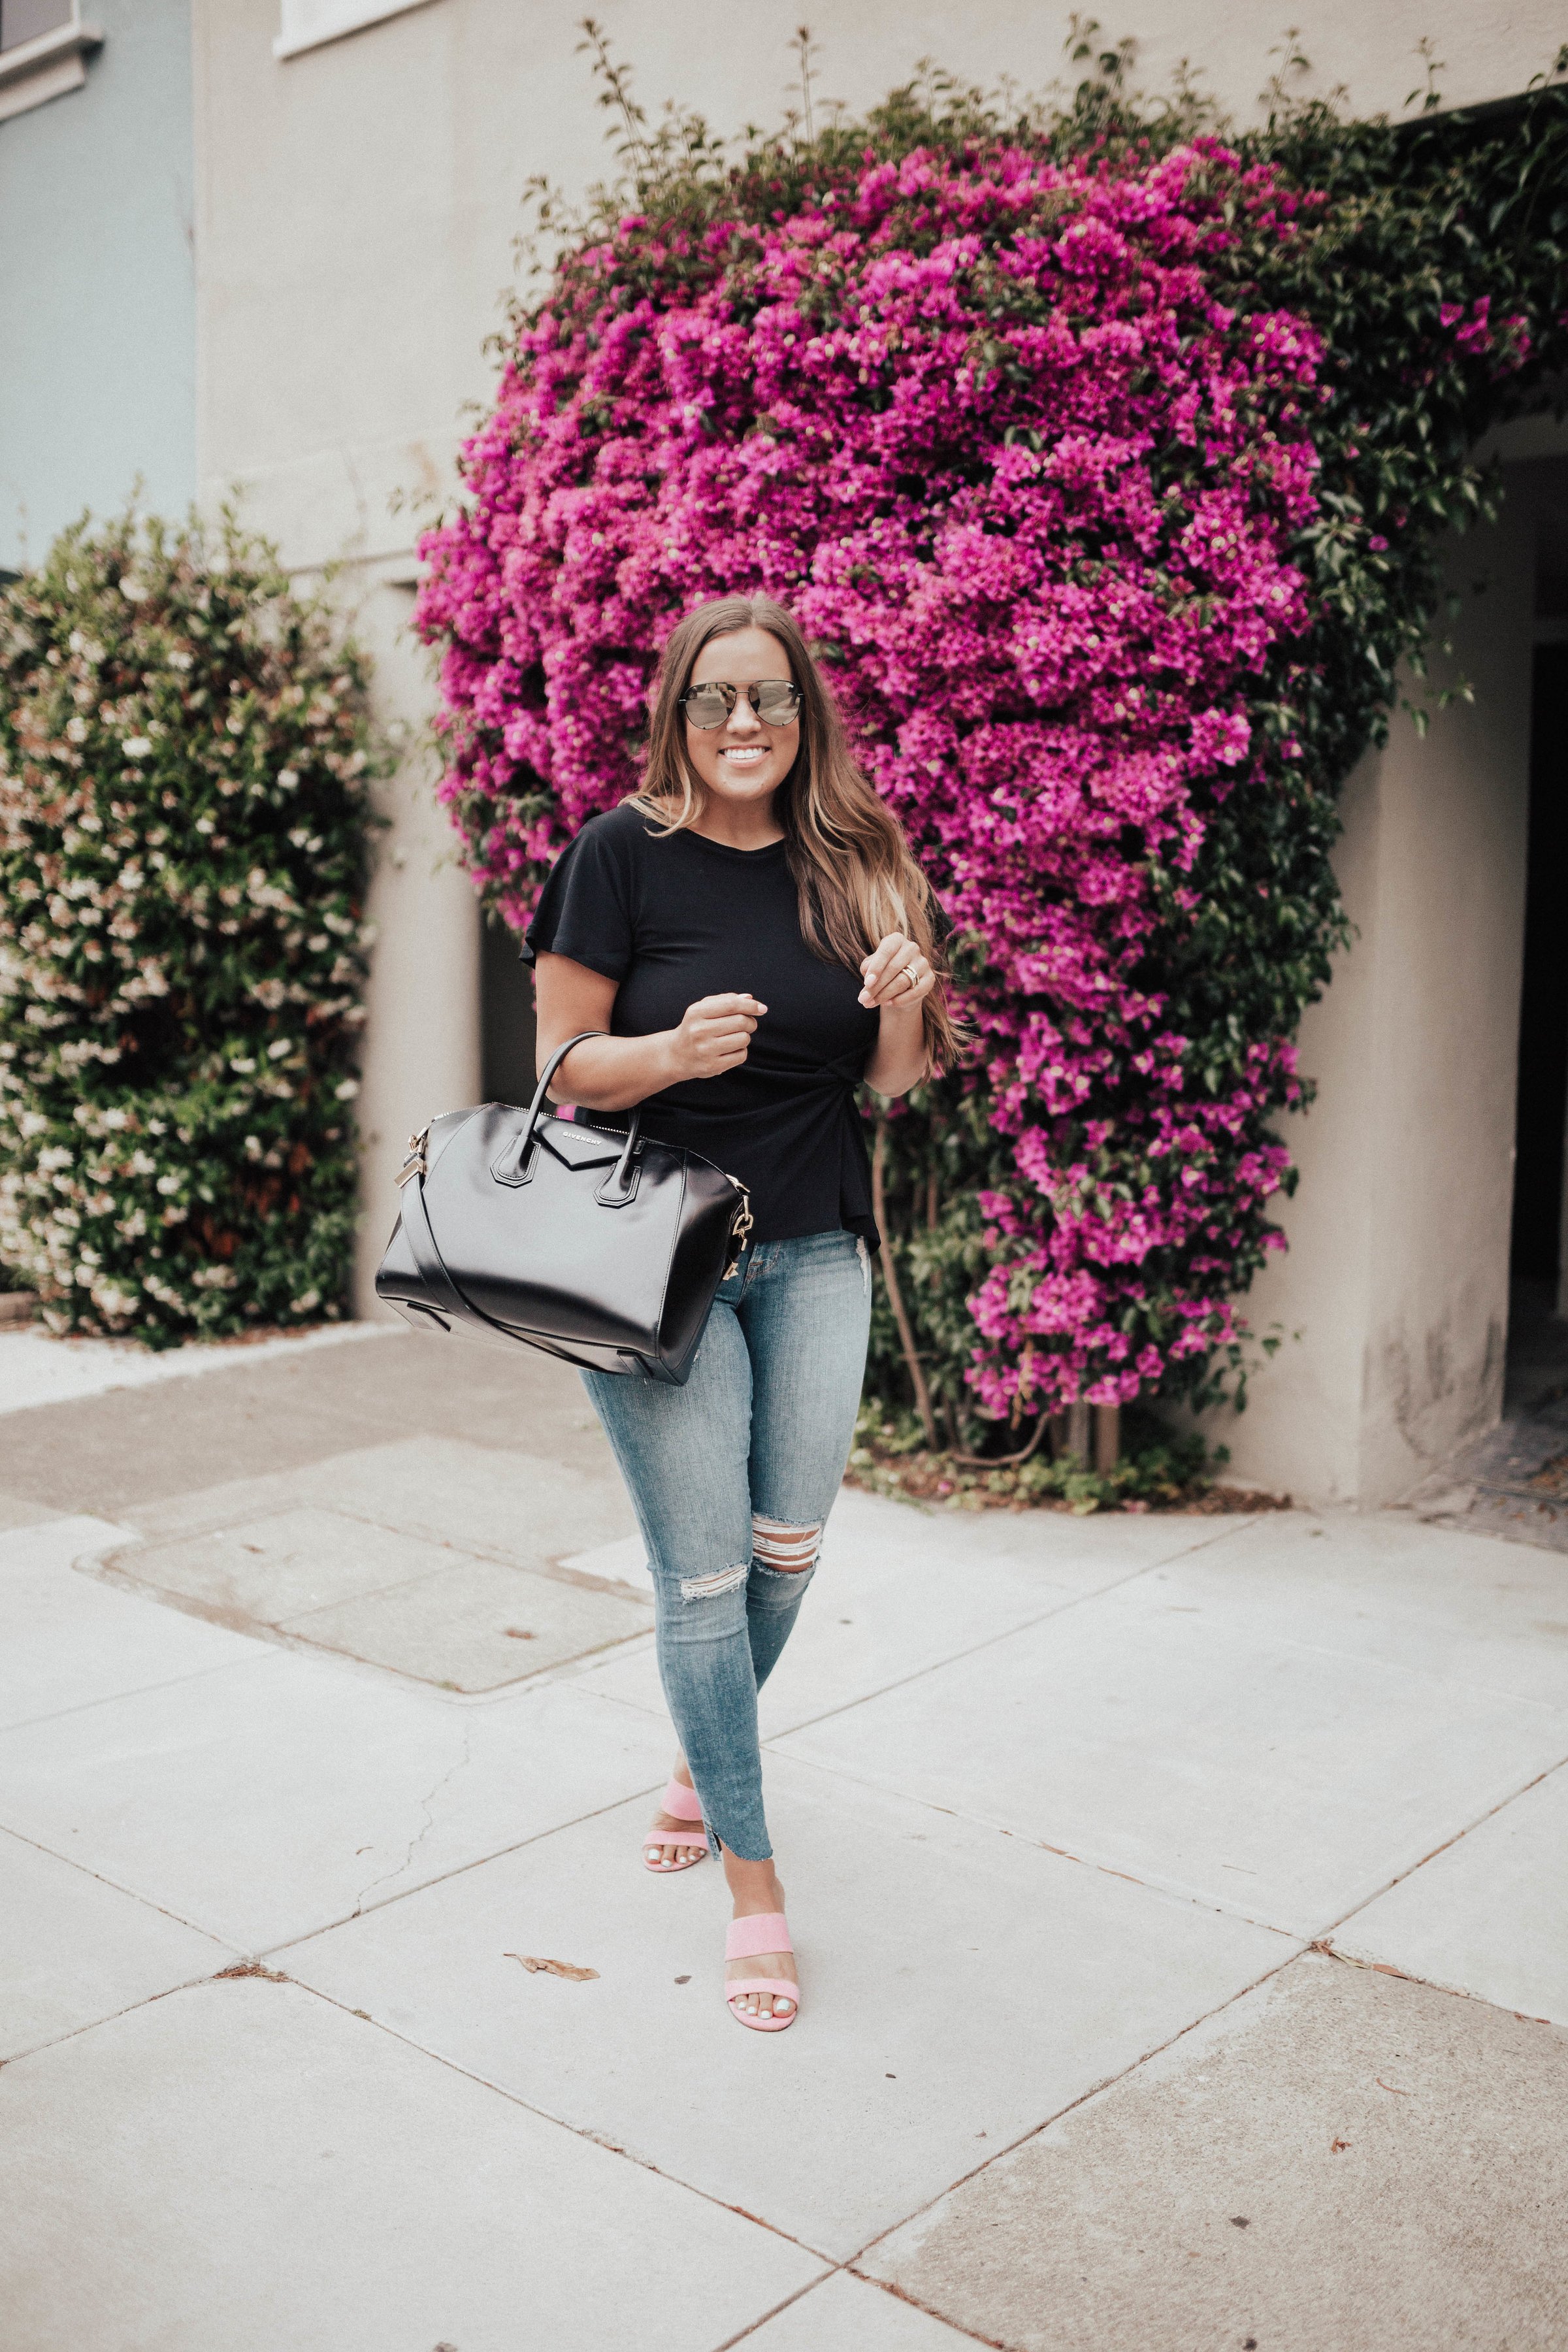 Ashley Zeal from Two Peas in a Prada shares a pair of Barbie Pink sandals by Kristin Cavallari. She is also wearing Good American Jeans and a Givenchy bag. 